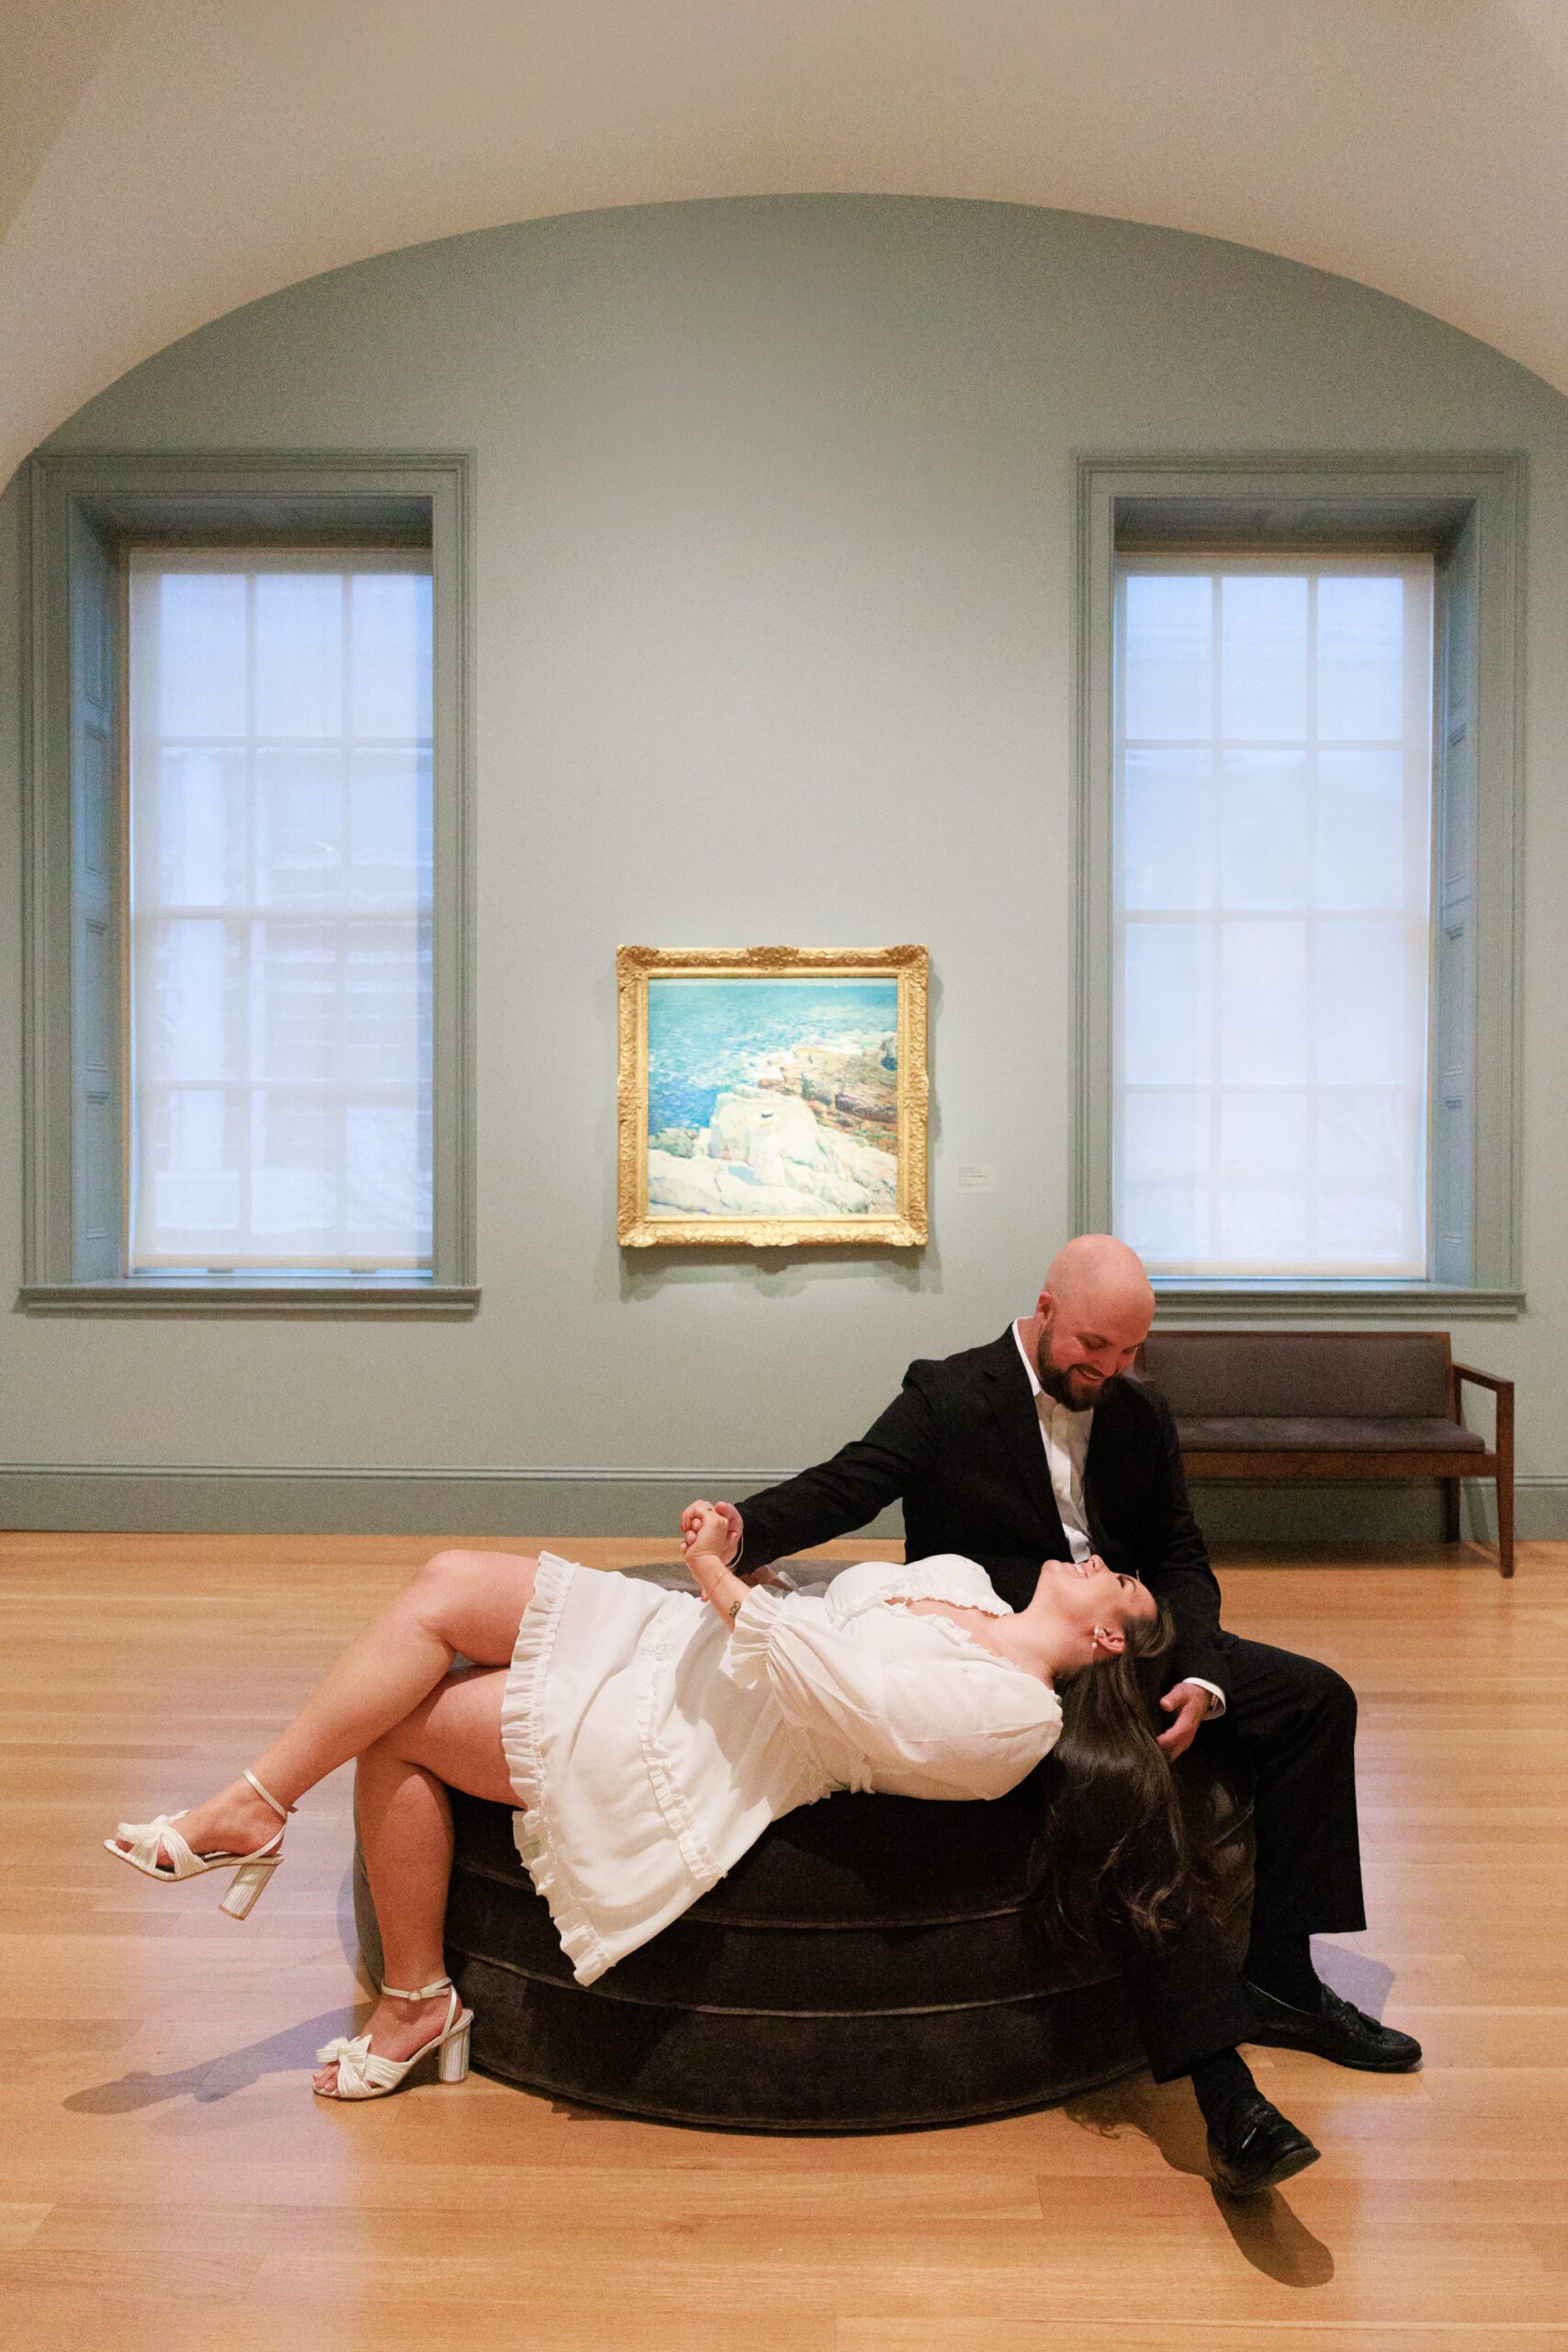 The couple is taking their engagement photos together at an art gallery in Washington DC. This photo features the couple admiring each other.